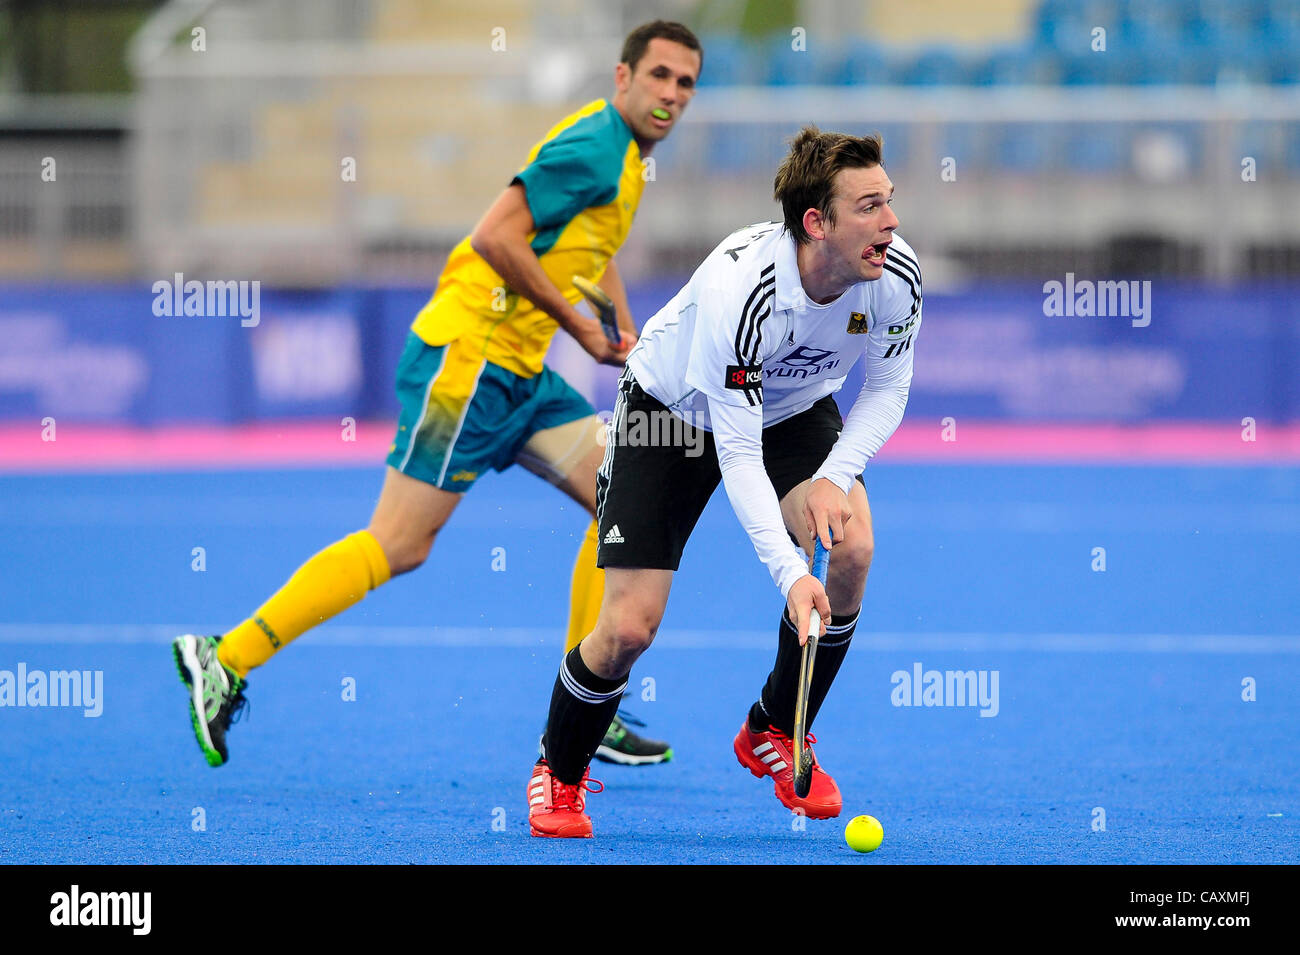 03.05.2012 London, England. Germany Forward # 8 Christopher WESLEY (GER) in action during the Men’s Preliminary match between Germany and Australia on Day 2 of the Visa International Invitational Hockey Tournament at the Riverbank Arena on the Olympic Park. (This is a 2012 Olympics test event, part  Stock Photo